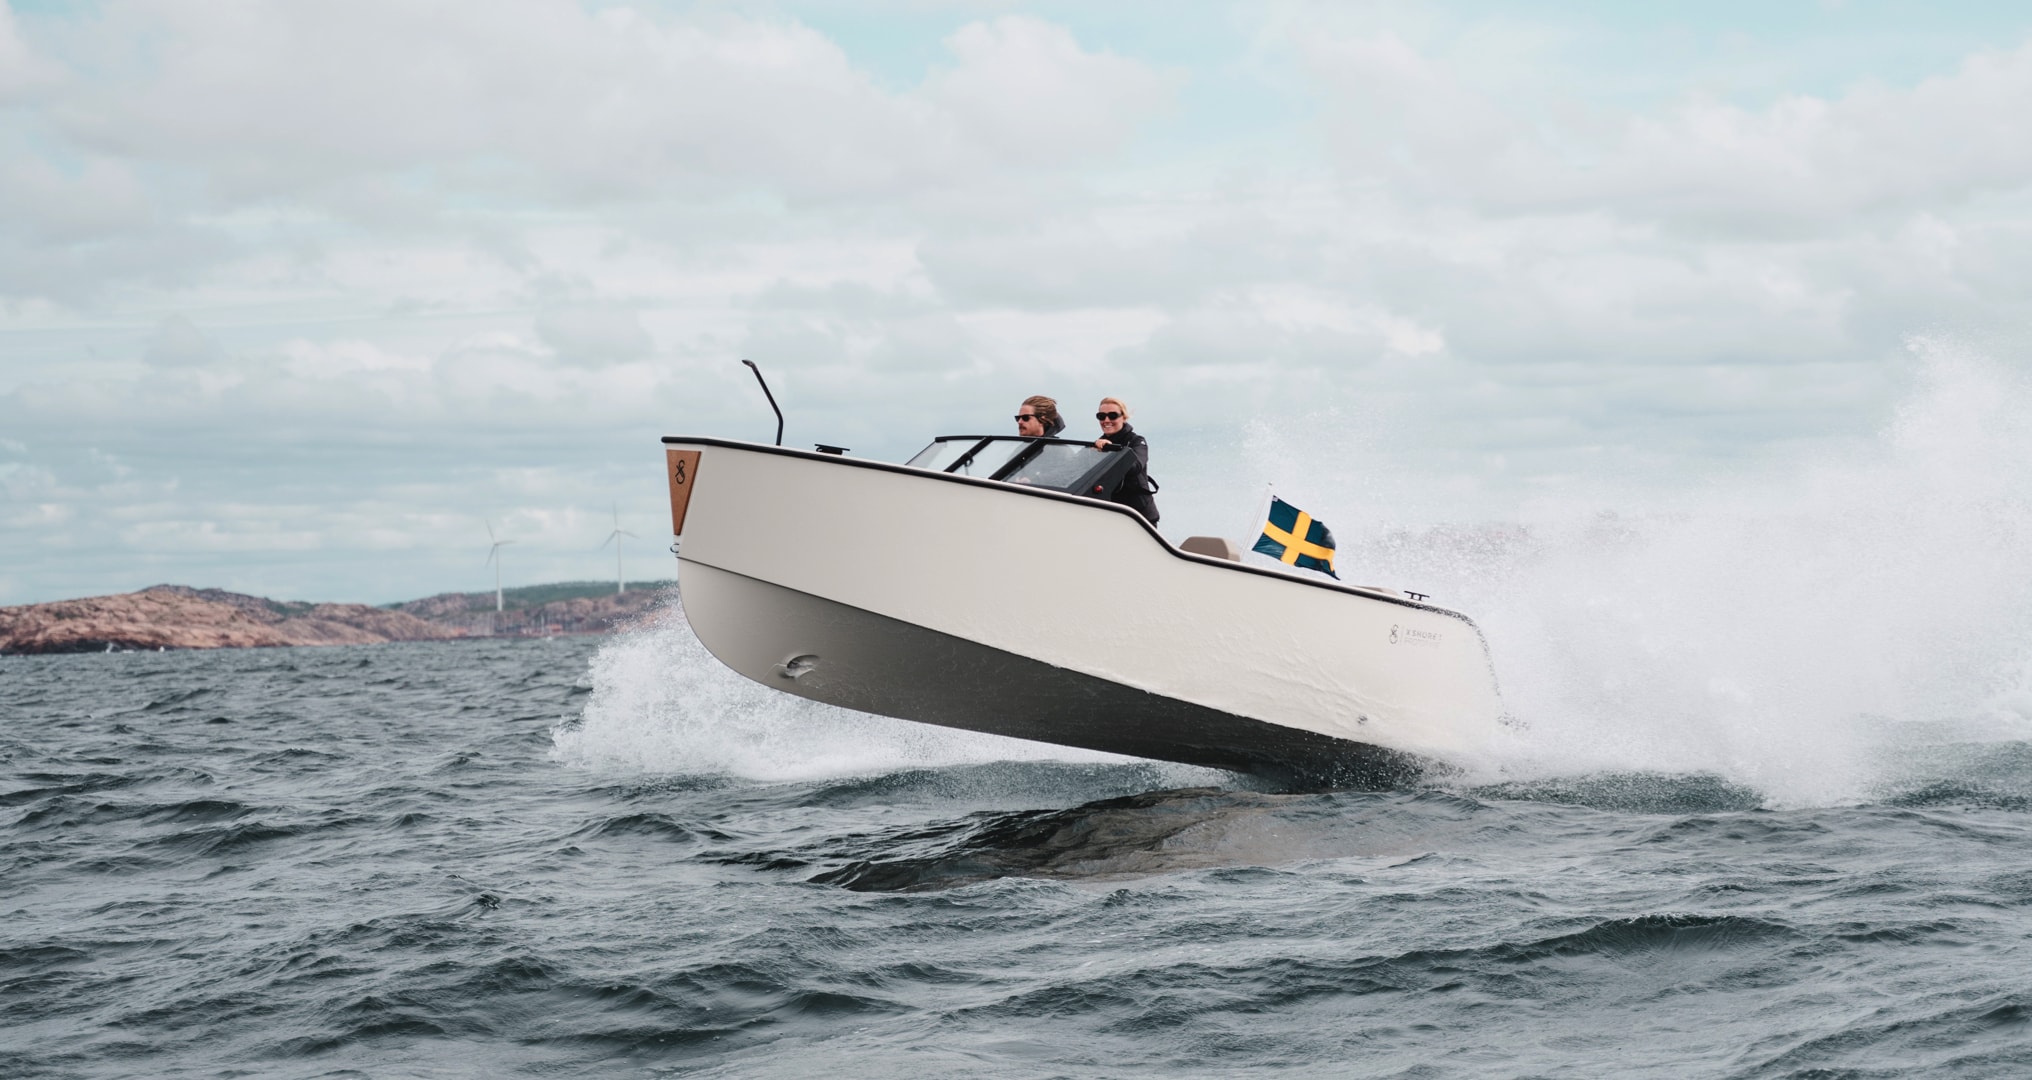 This new 30-foot Electric Boat has all the Features of a Motoryacht